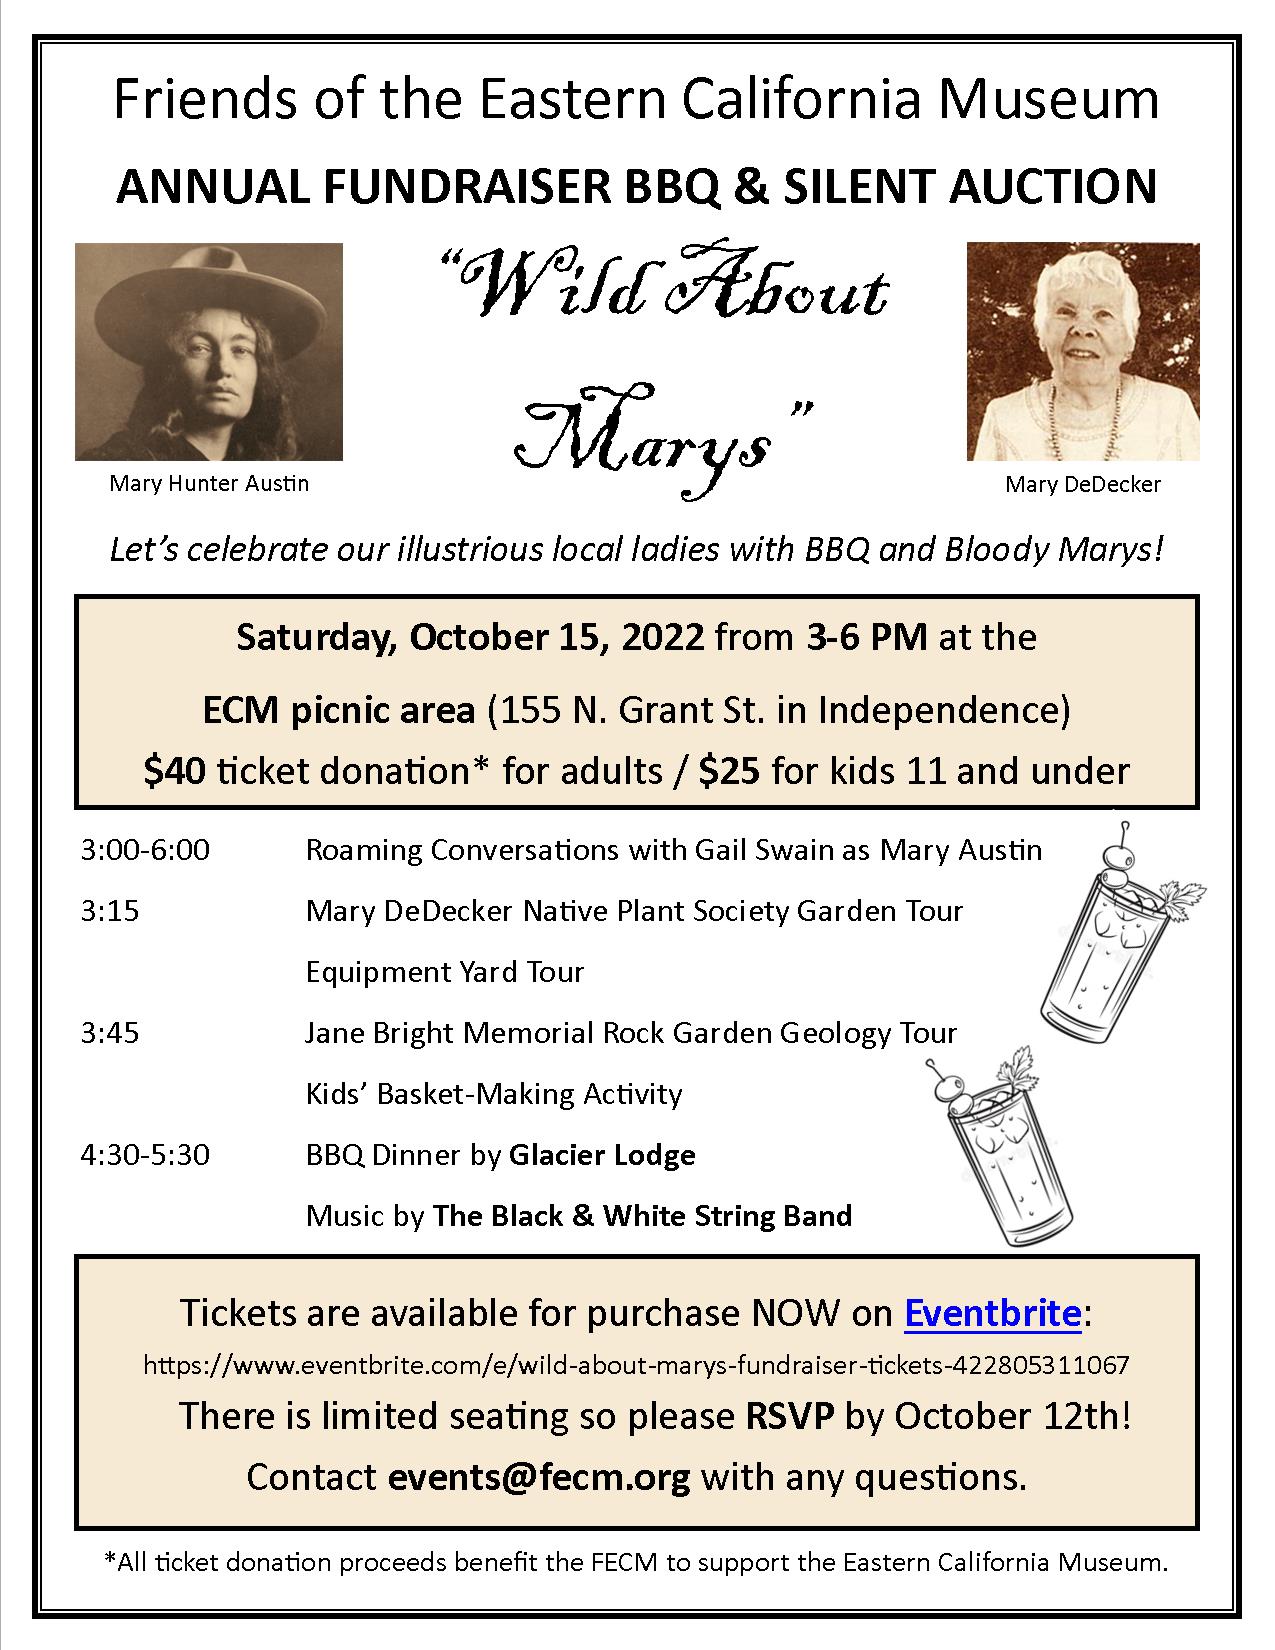 Wild About Marys flyer